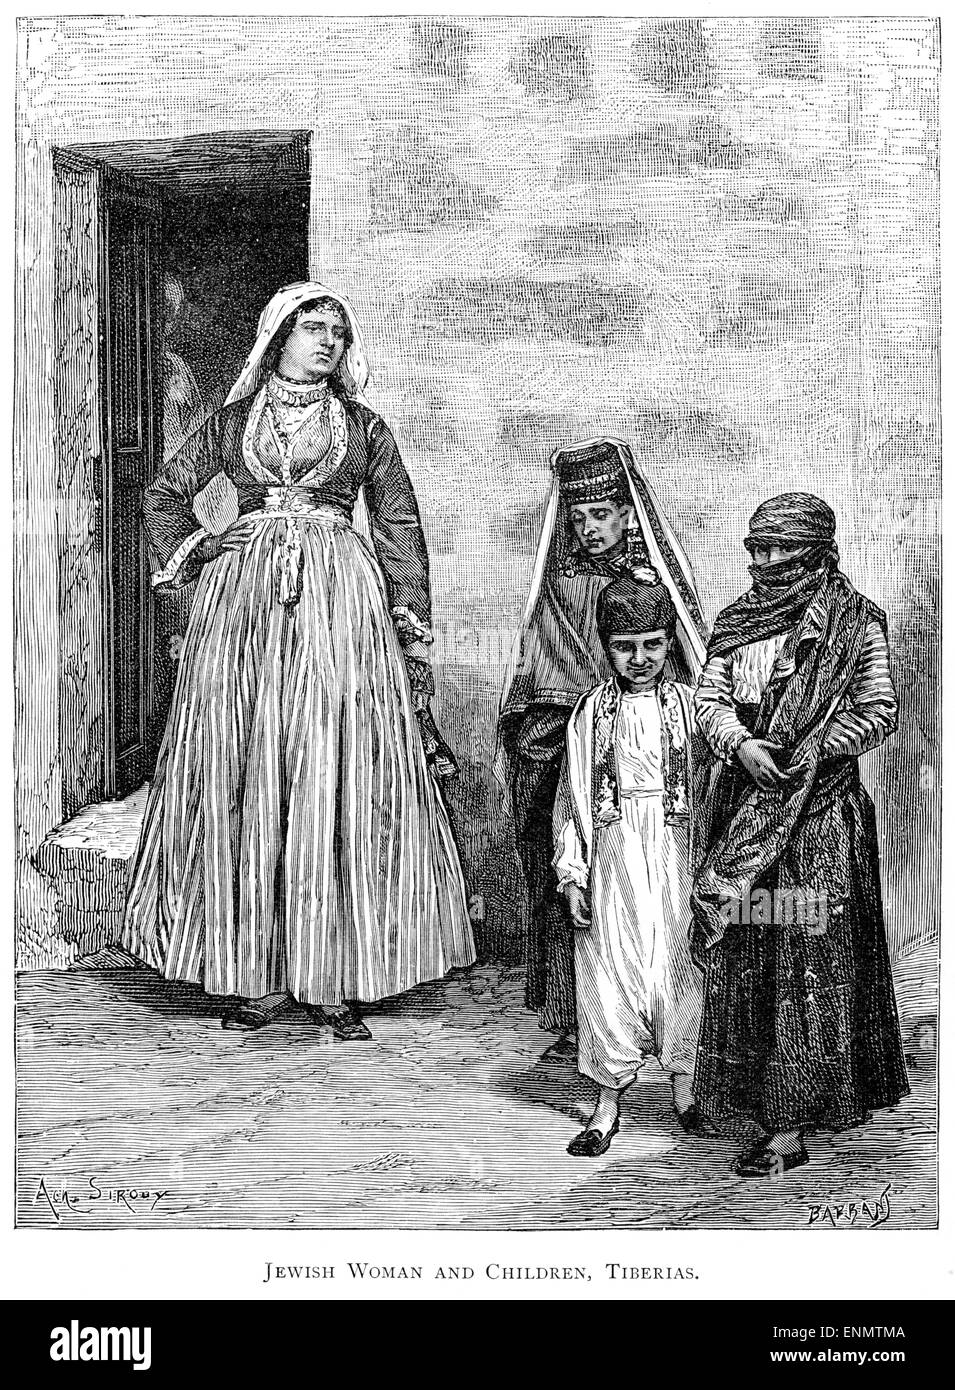 An engraving of a Jewish Woman and Children at Tiberias scanned at high resolution from a book printed in 1889. Stock Photo